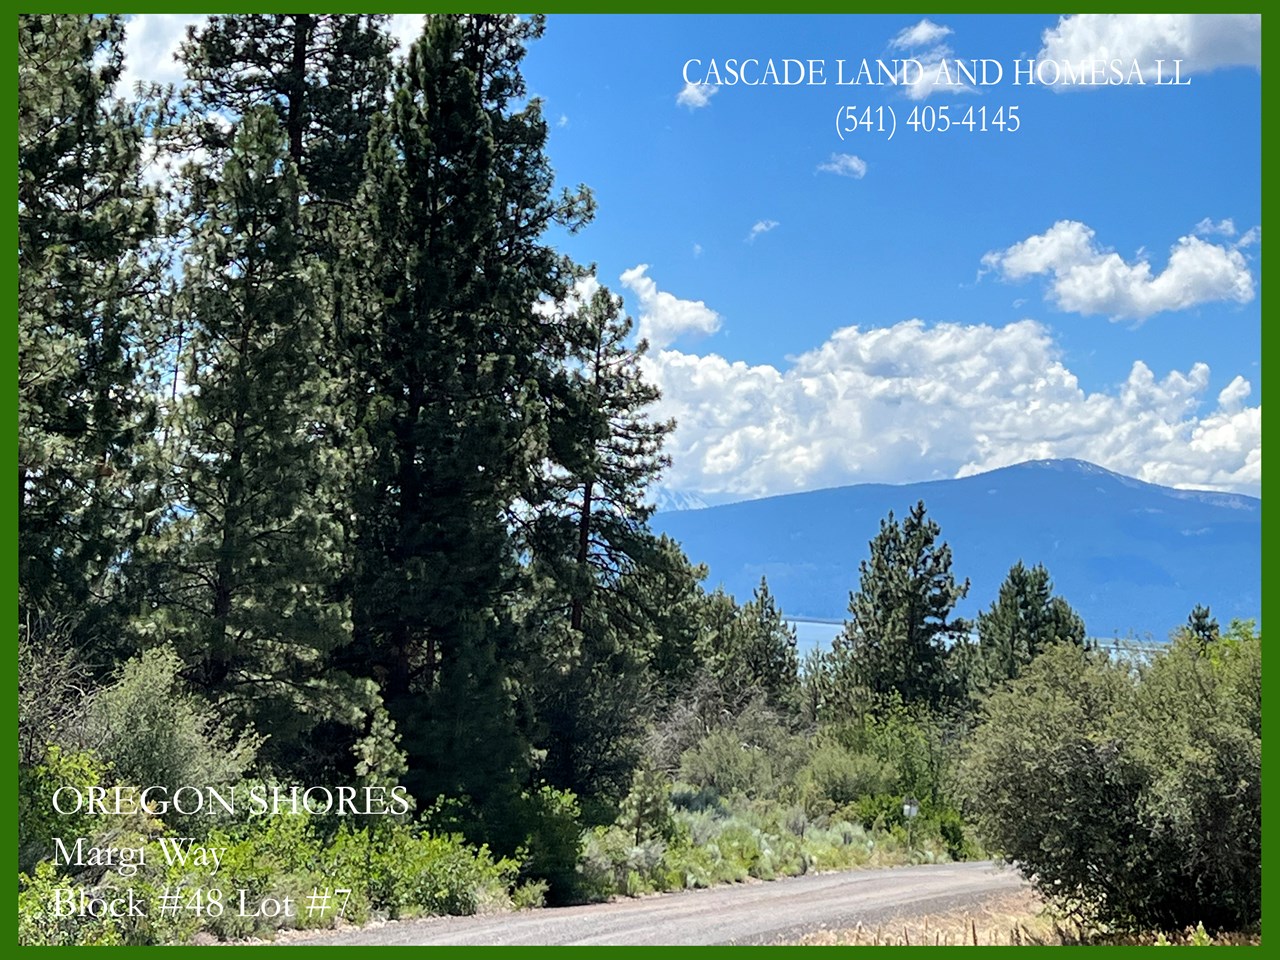 there are views of the lake from the property. a two story home would offer an even better view of agency lake and the surrounding snow-capped cascade mountains!